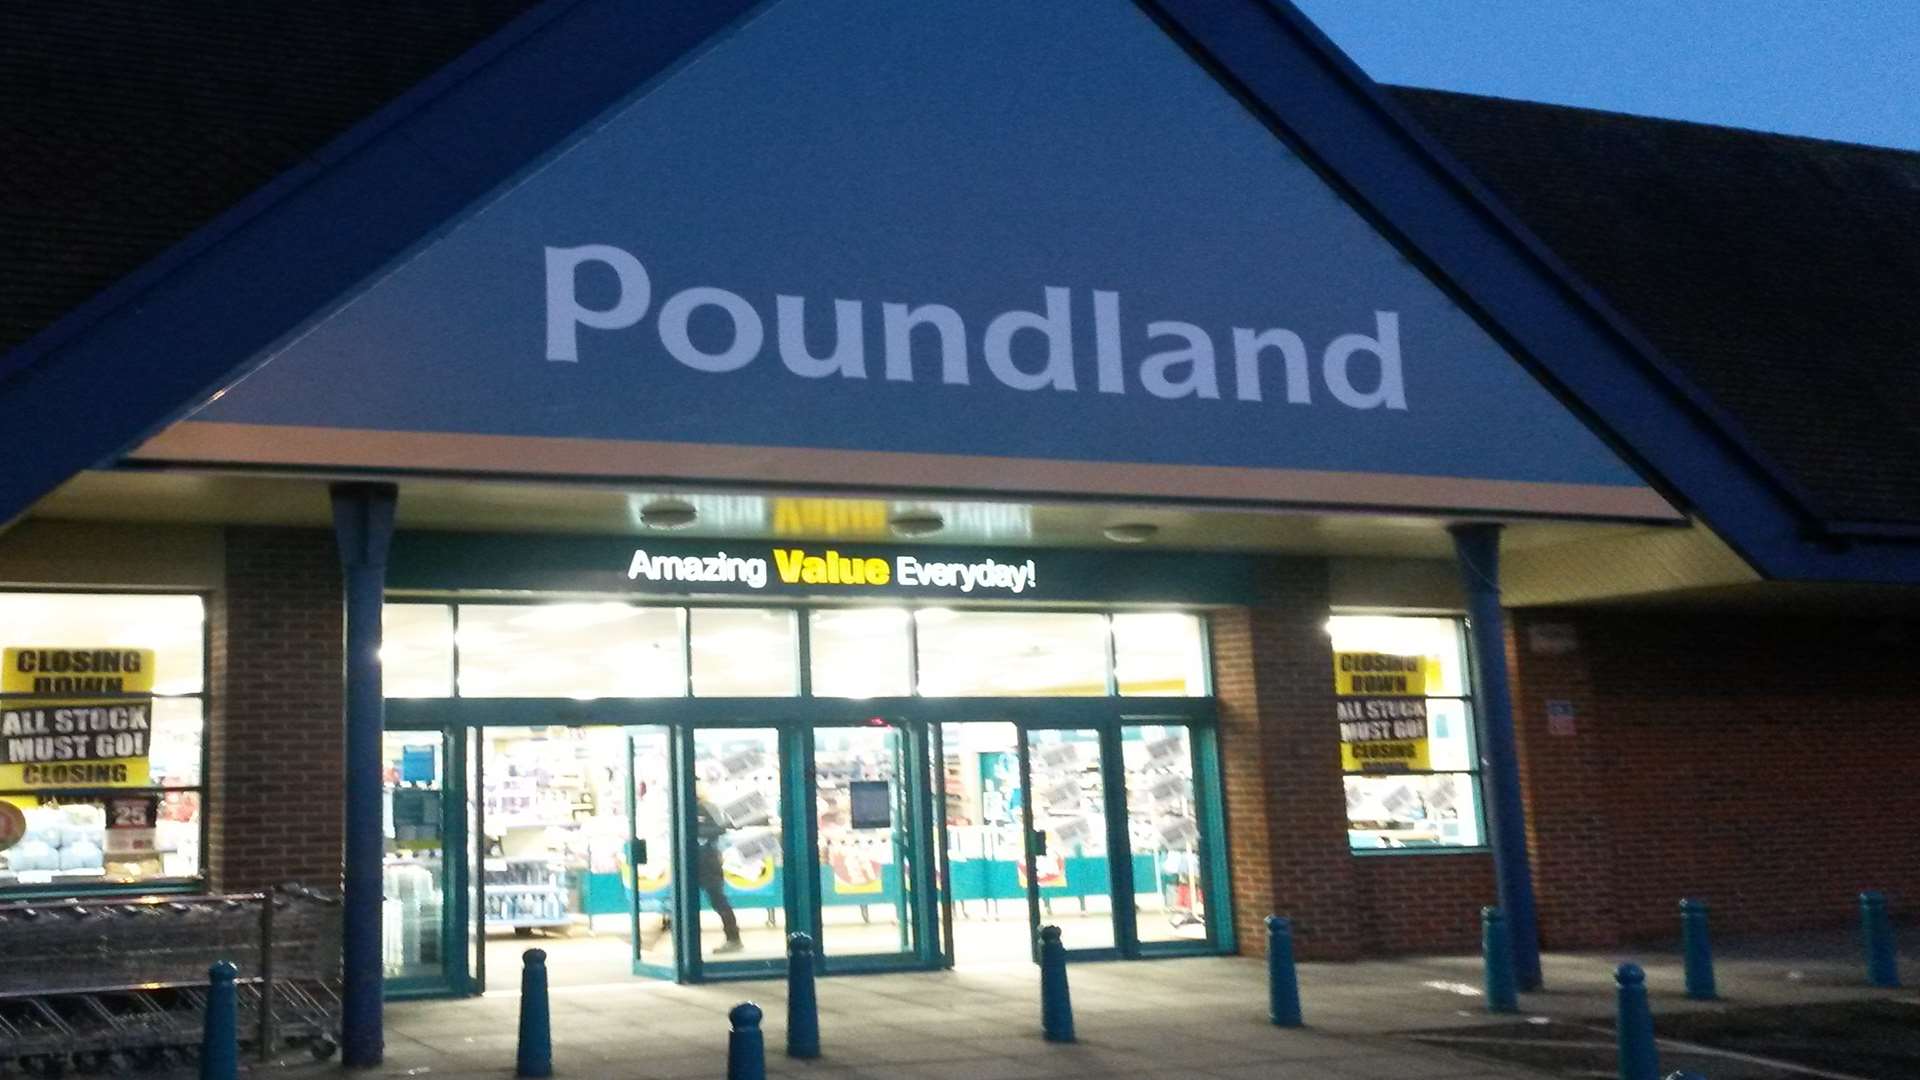 The Poundland store on Ashford's Warren Retail Park is having a closing down sale